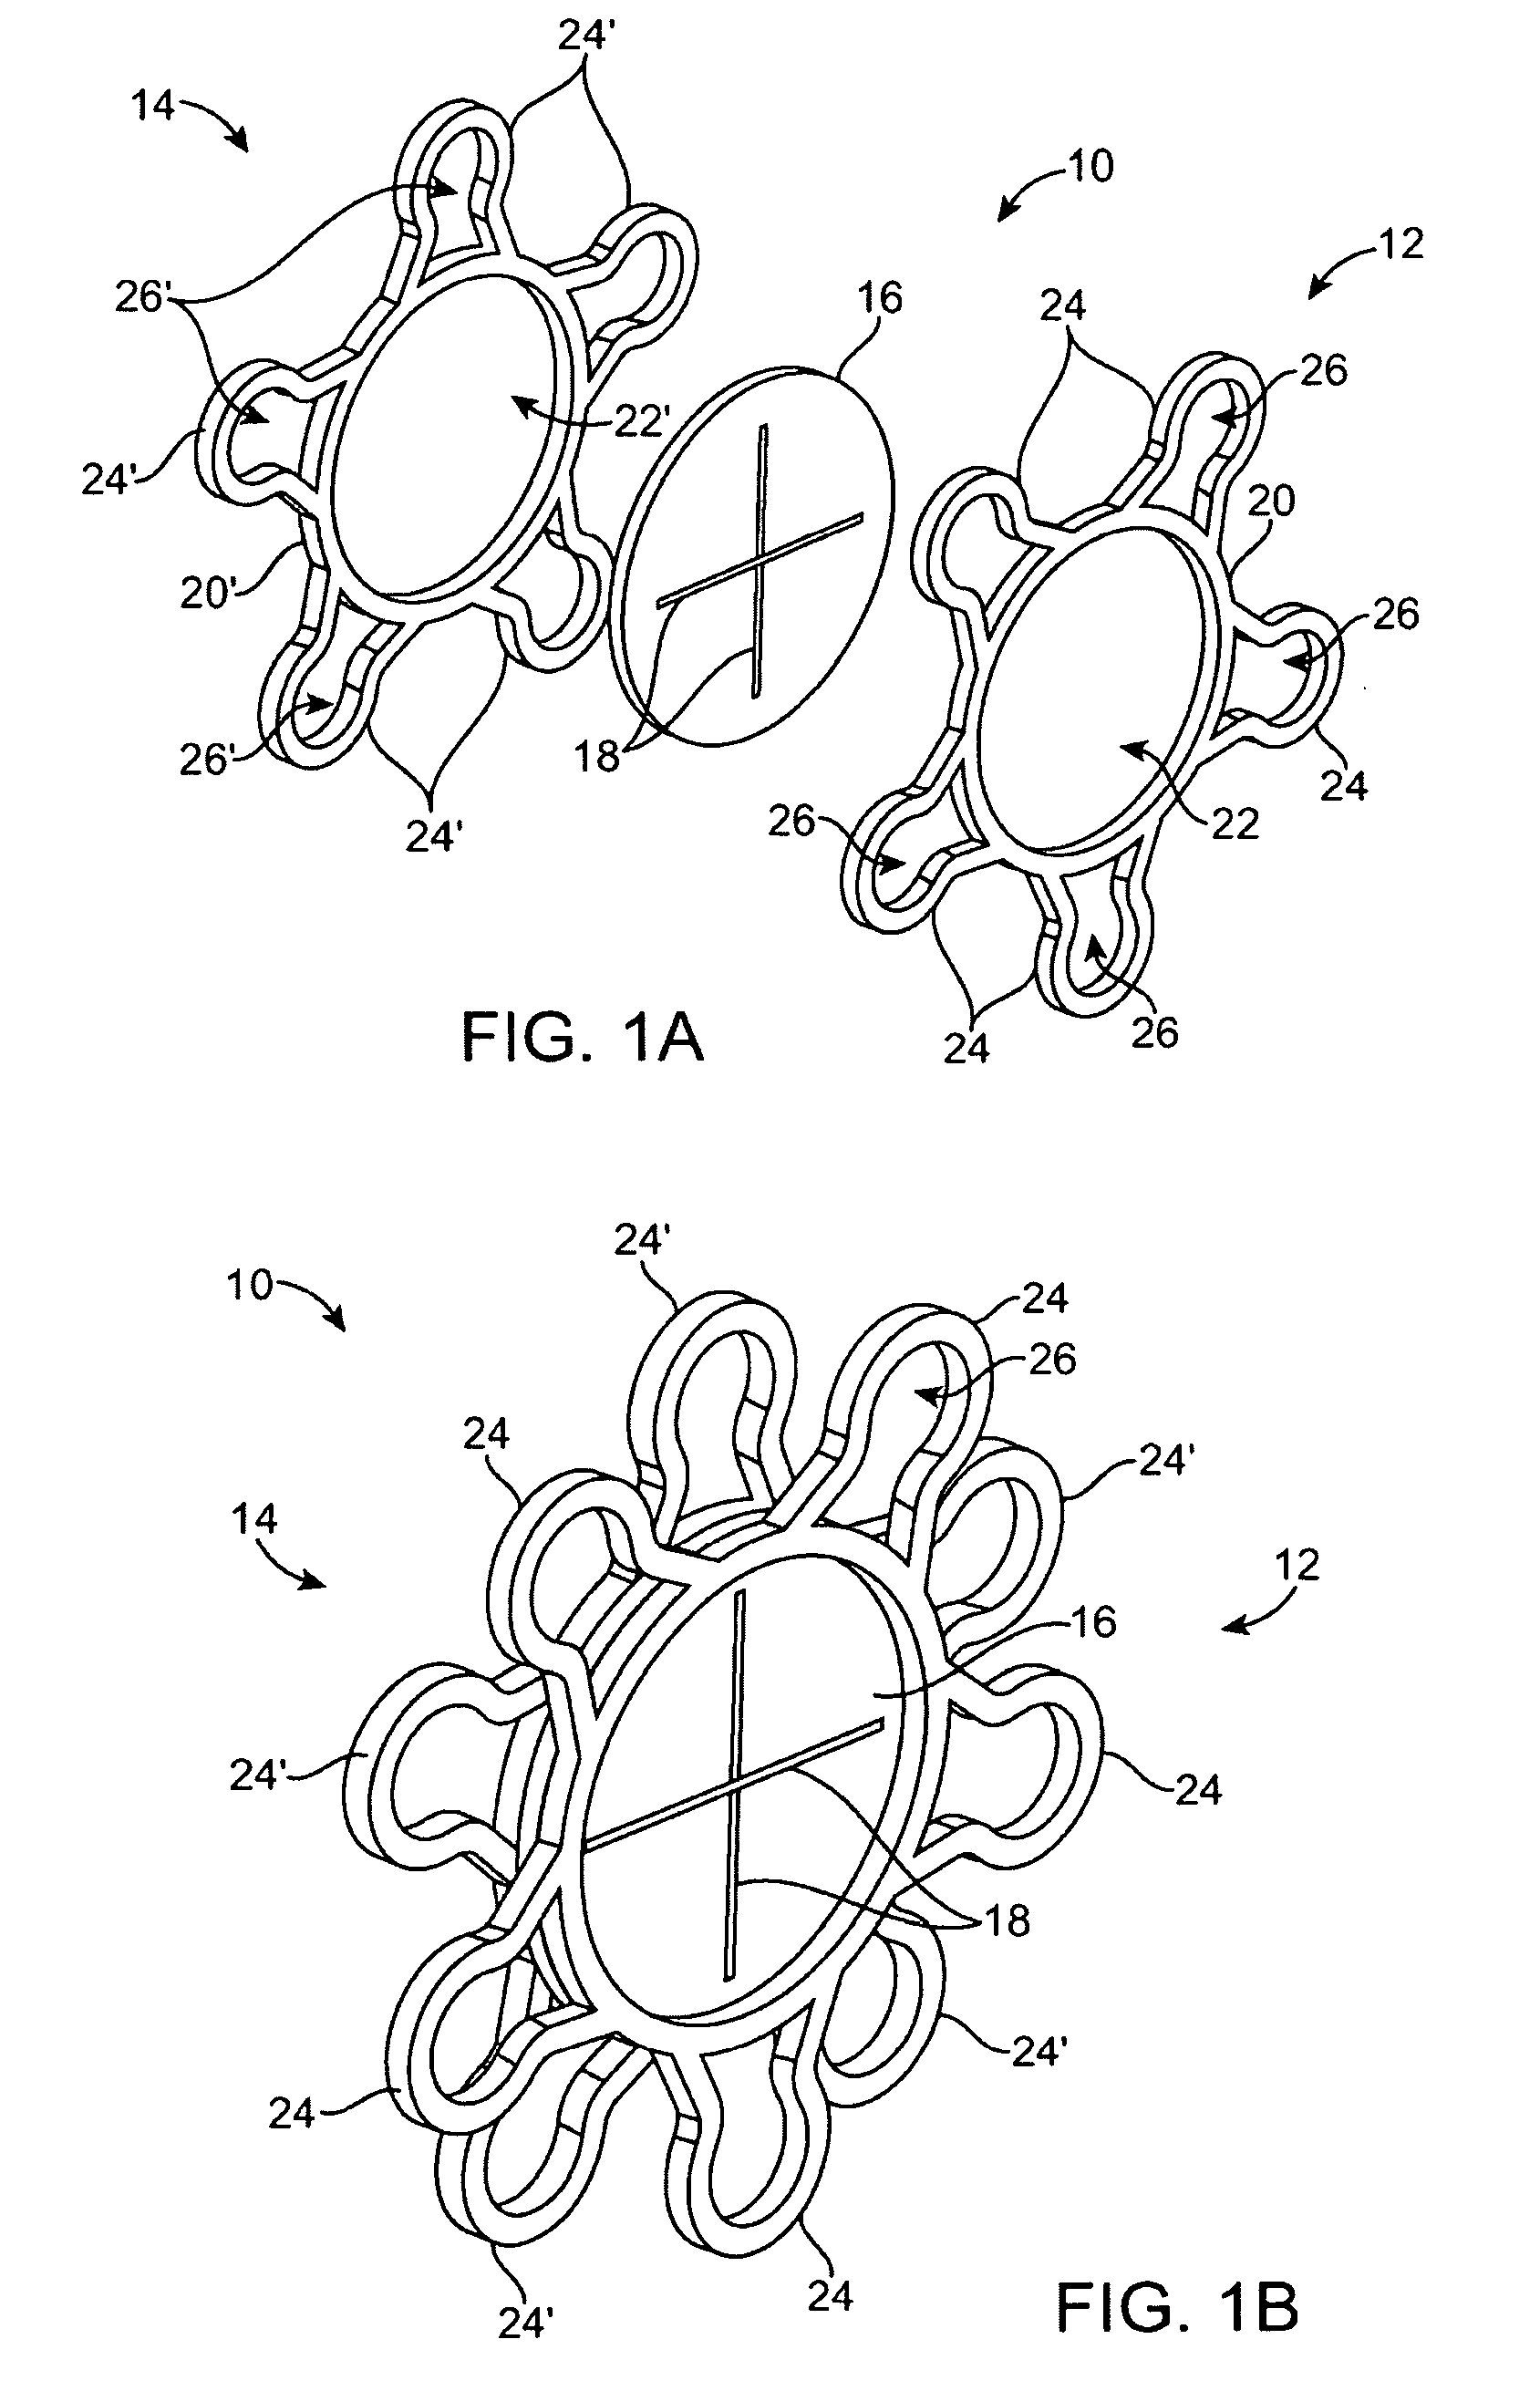 Systems for controlled closure of body lumens